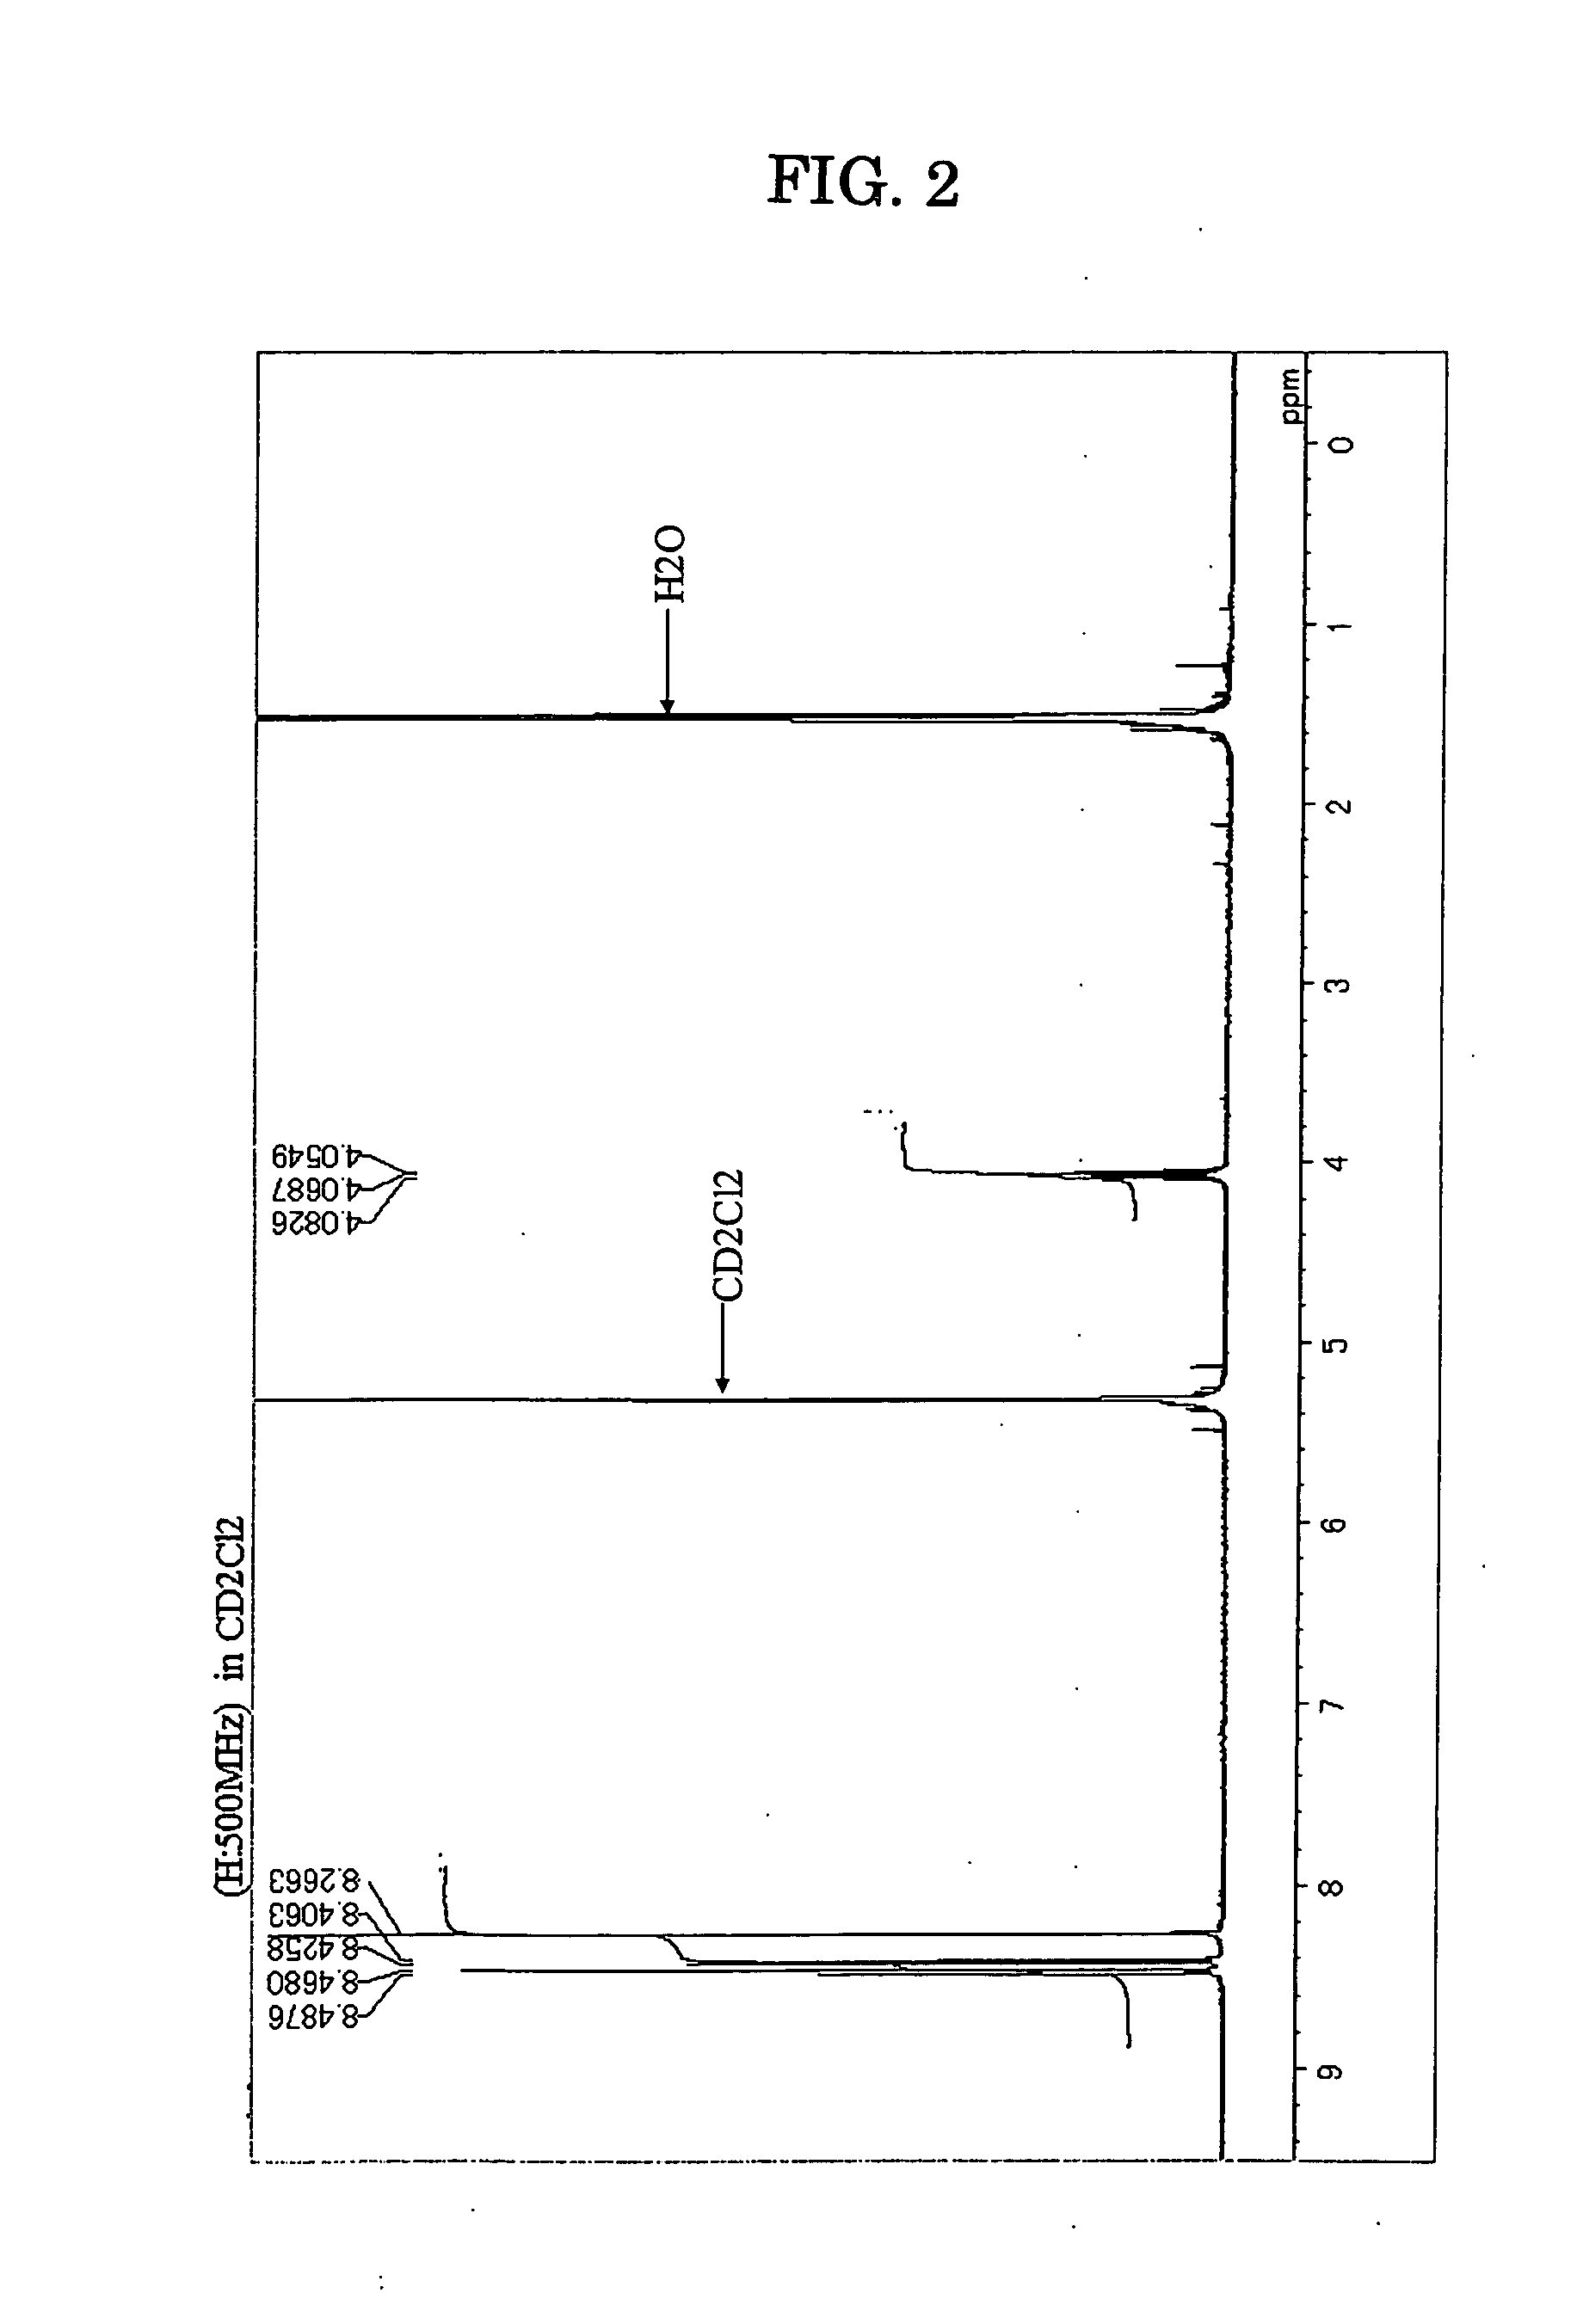 Aromatic Amine Derivative, Organic Electroluminescent Element Employing the Same, and Process for Producing Aromatic Amine Derivative